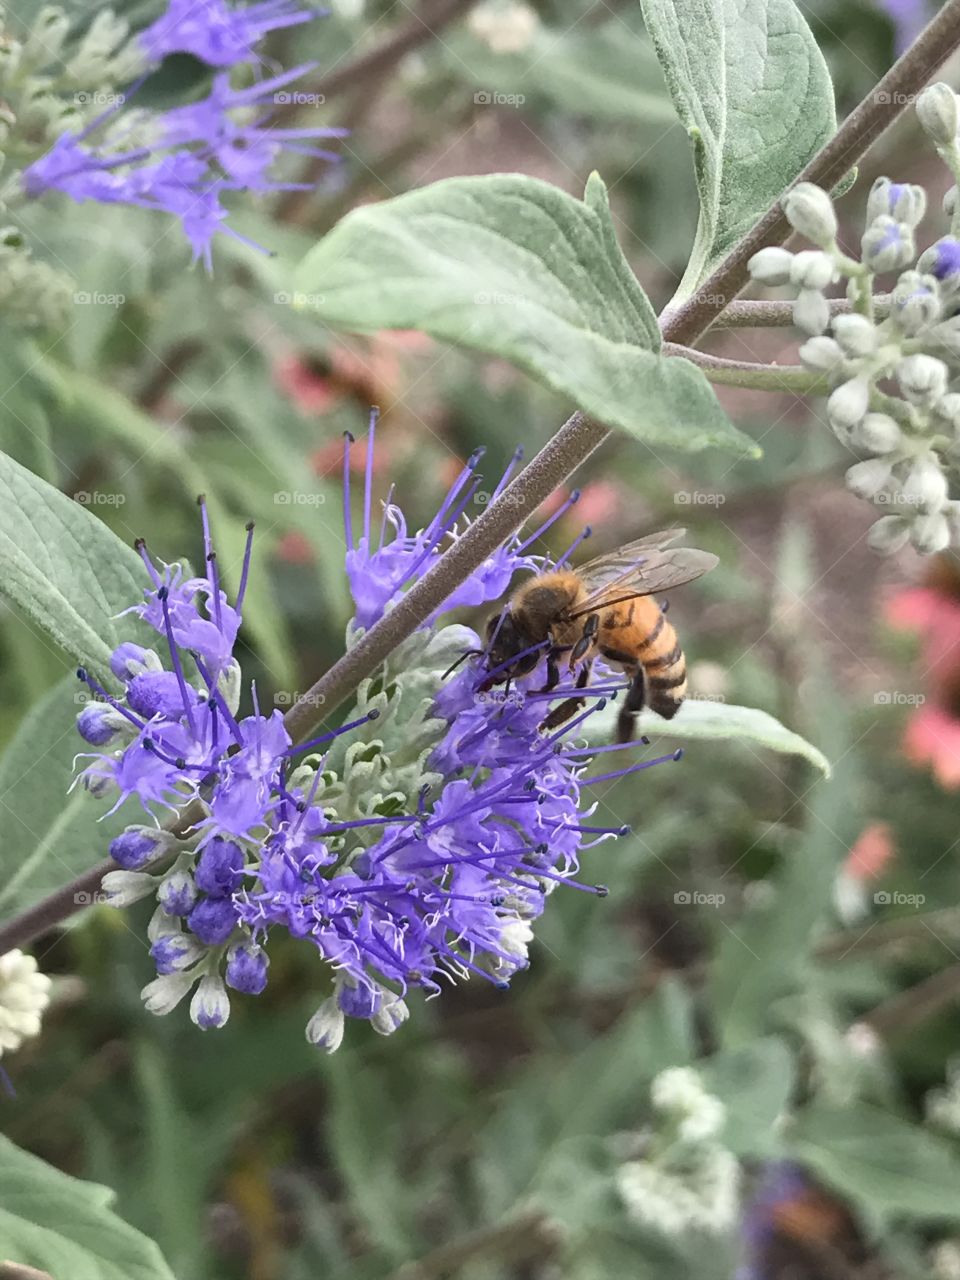 Purple flowers being pollinated by a tiny honey bee